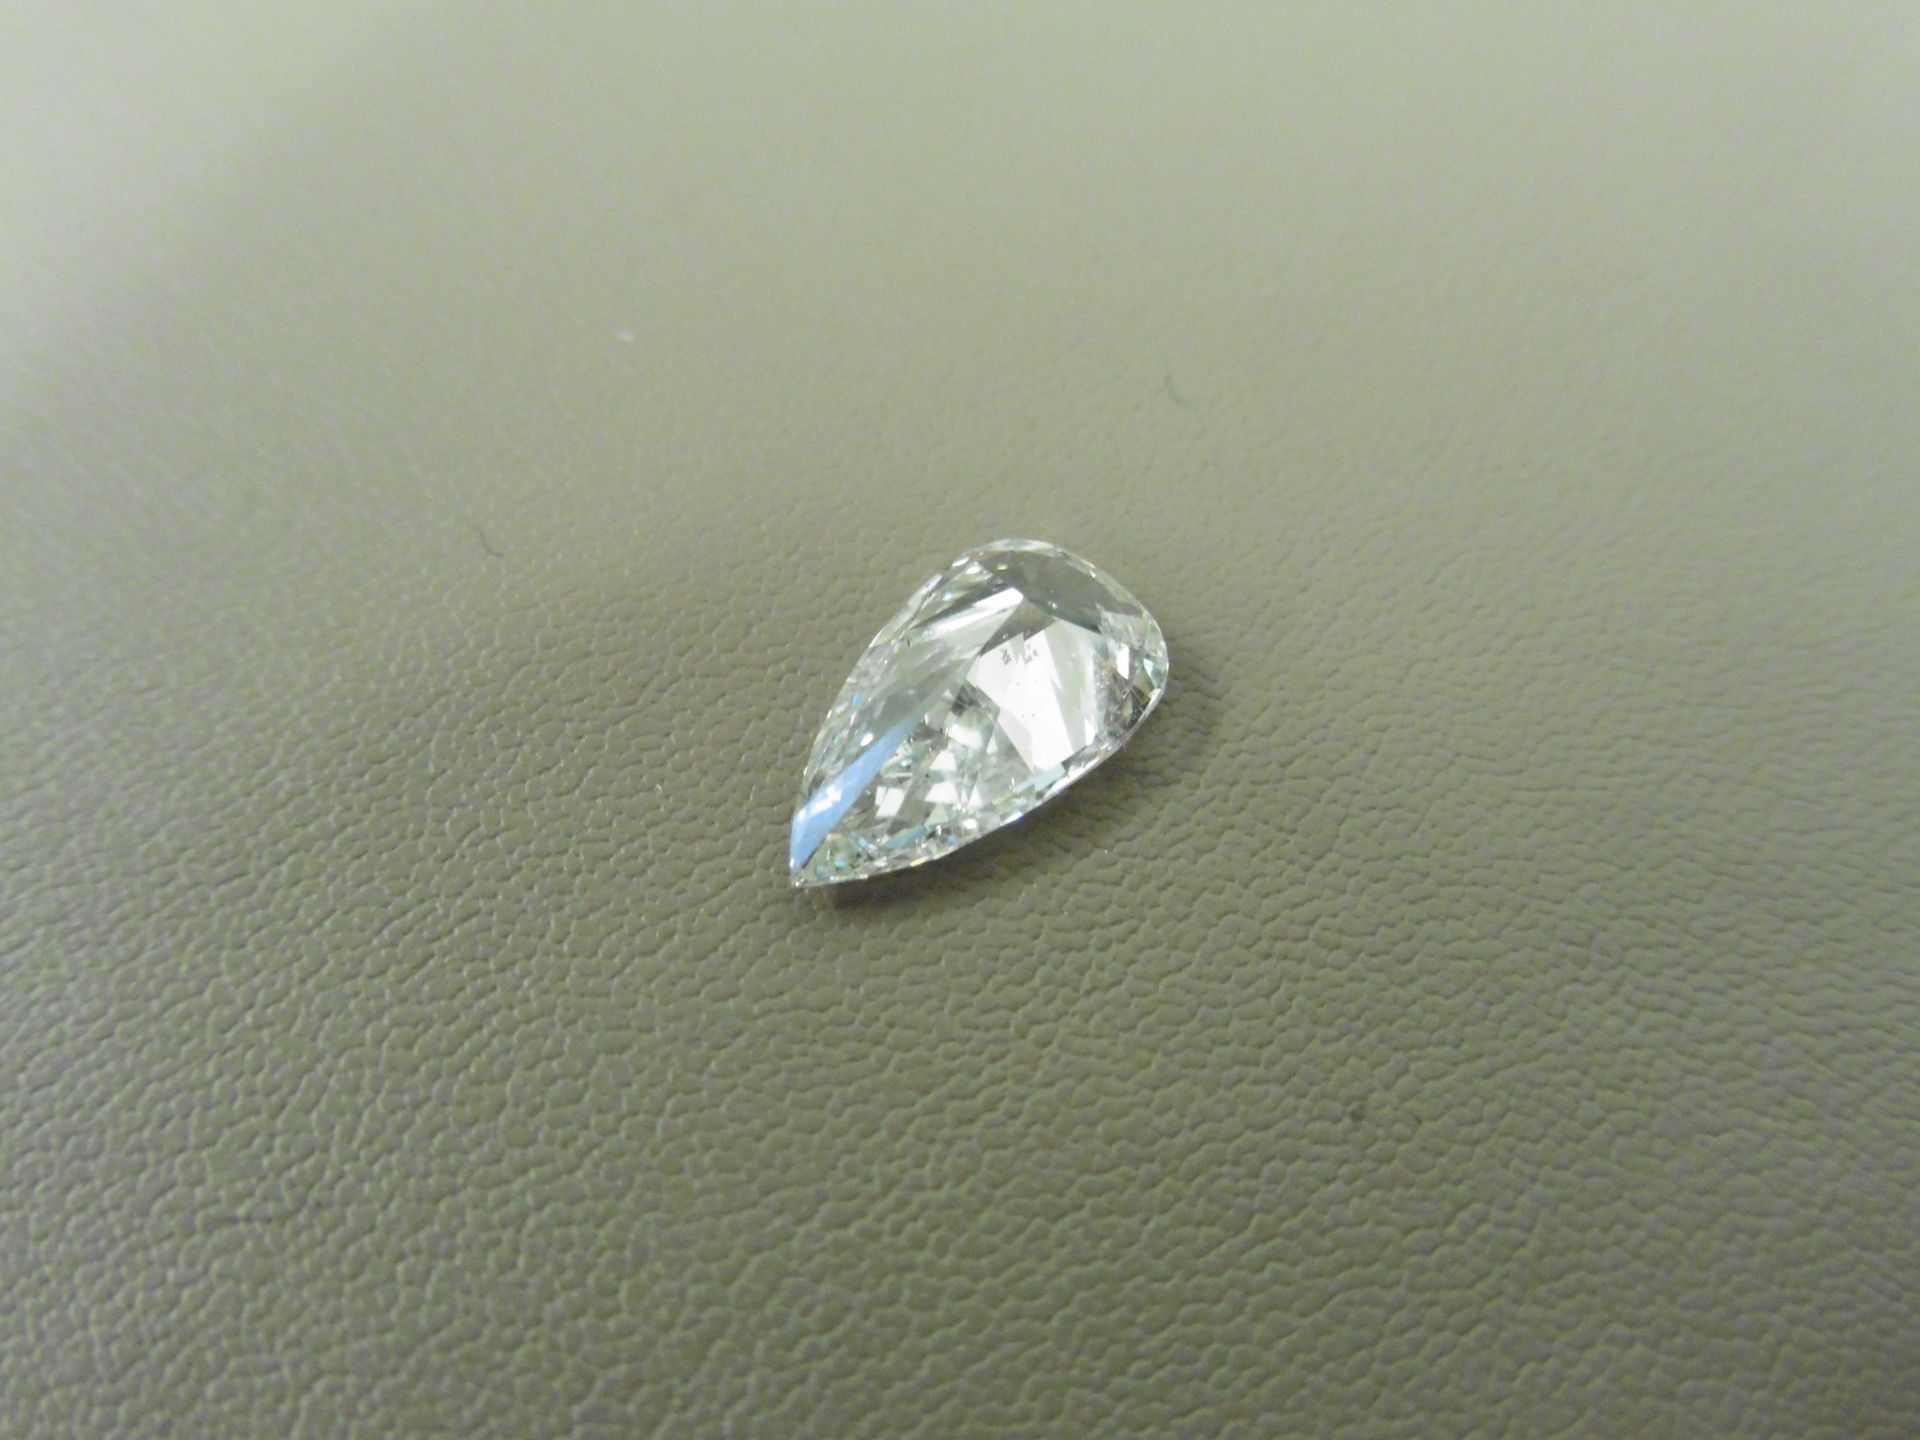 1.67ct enhanced pear shaped diamond. E colour and Si2clarity ( laser drilled ). EGL certification. - Image 5 of 5